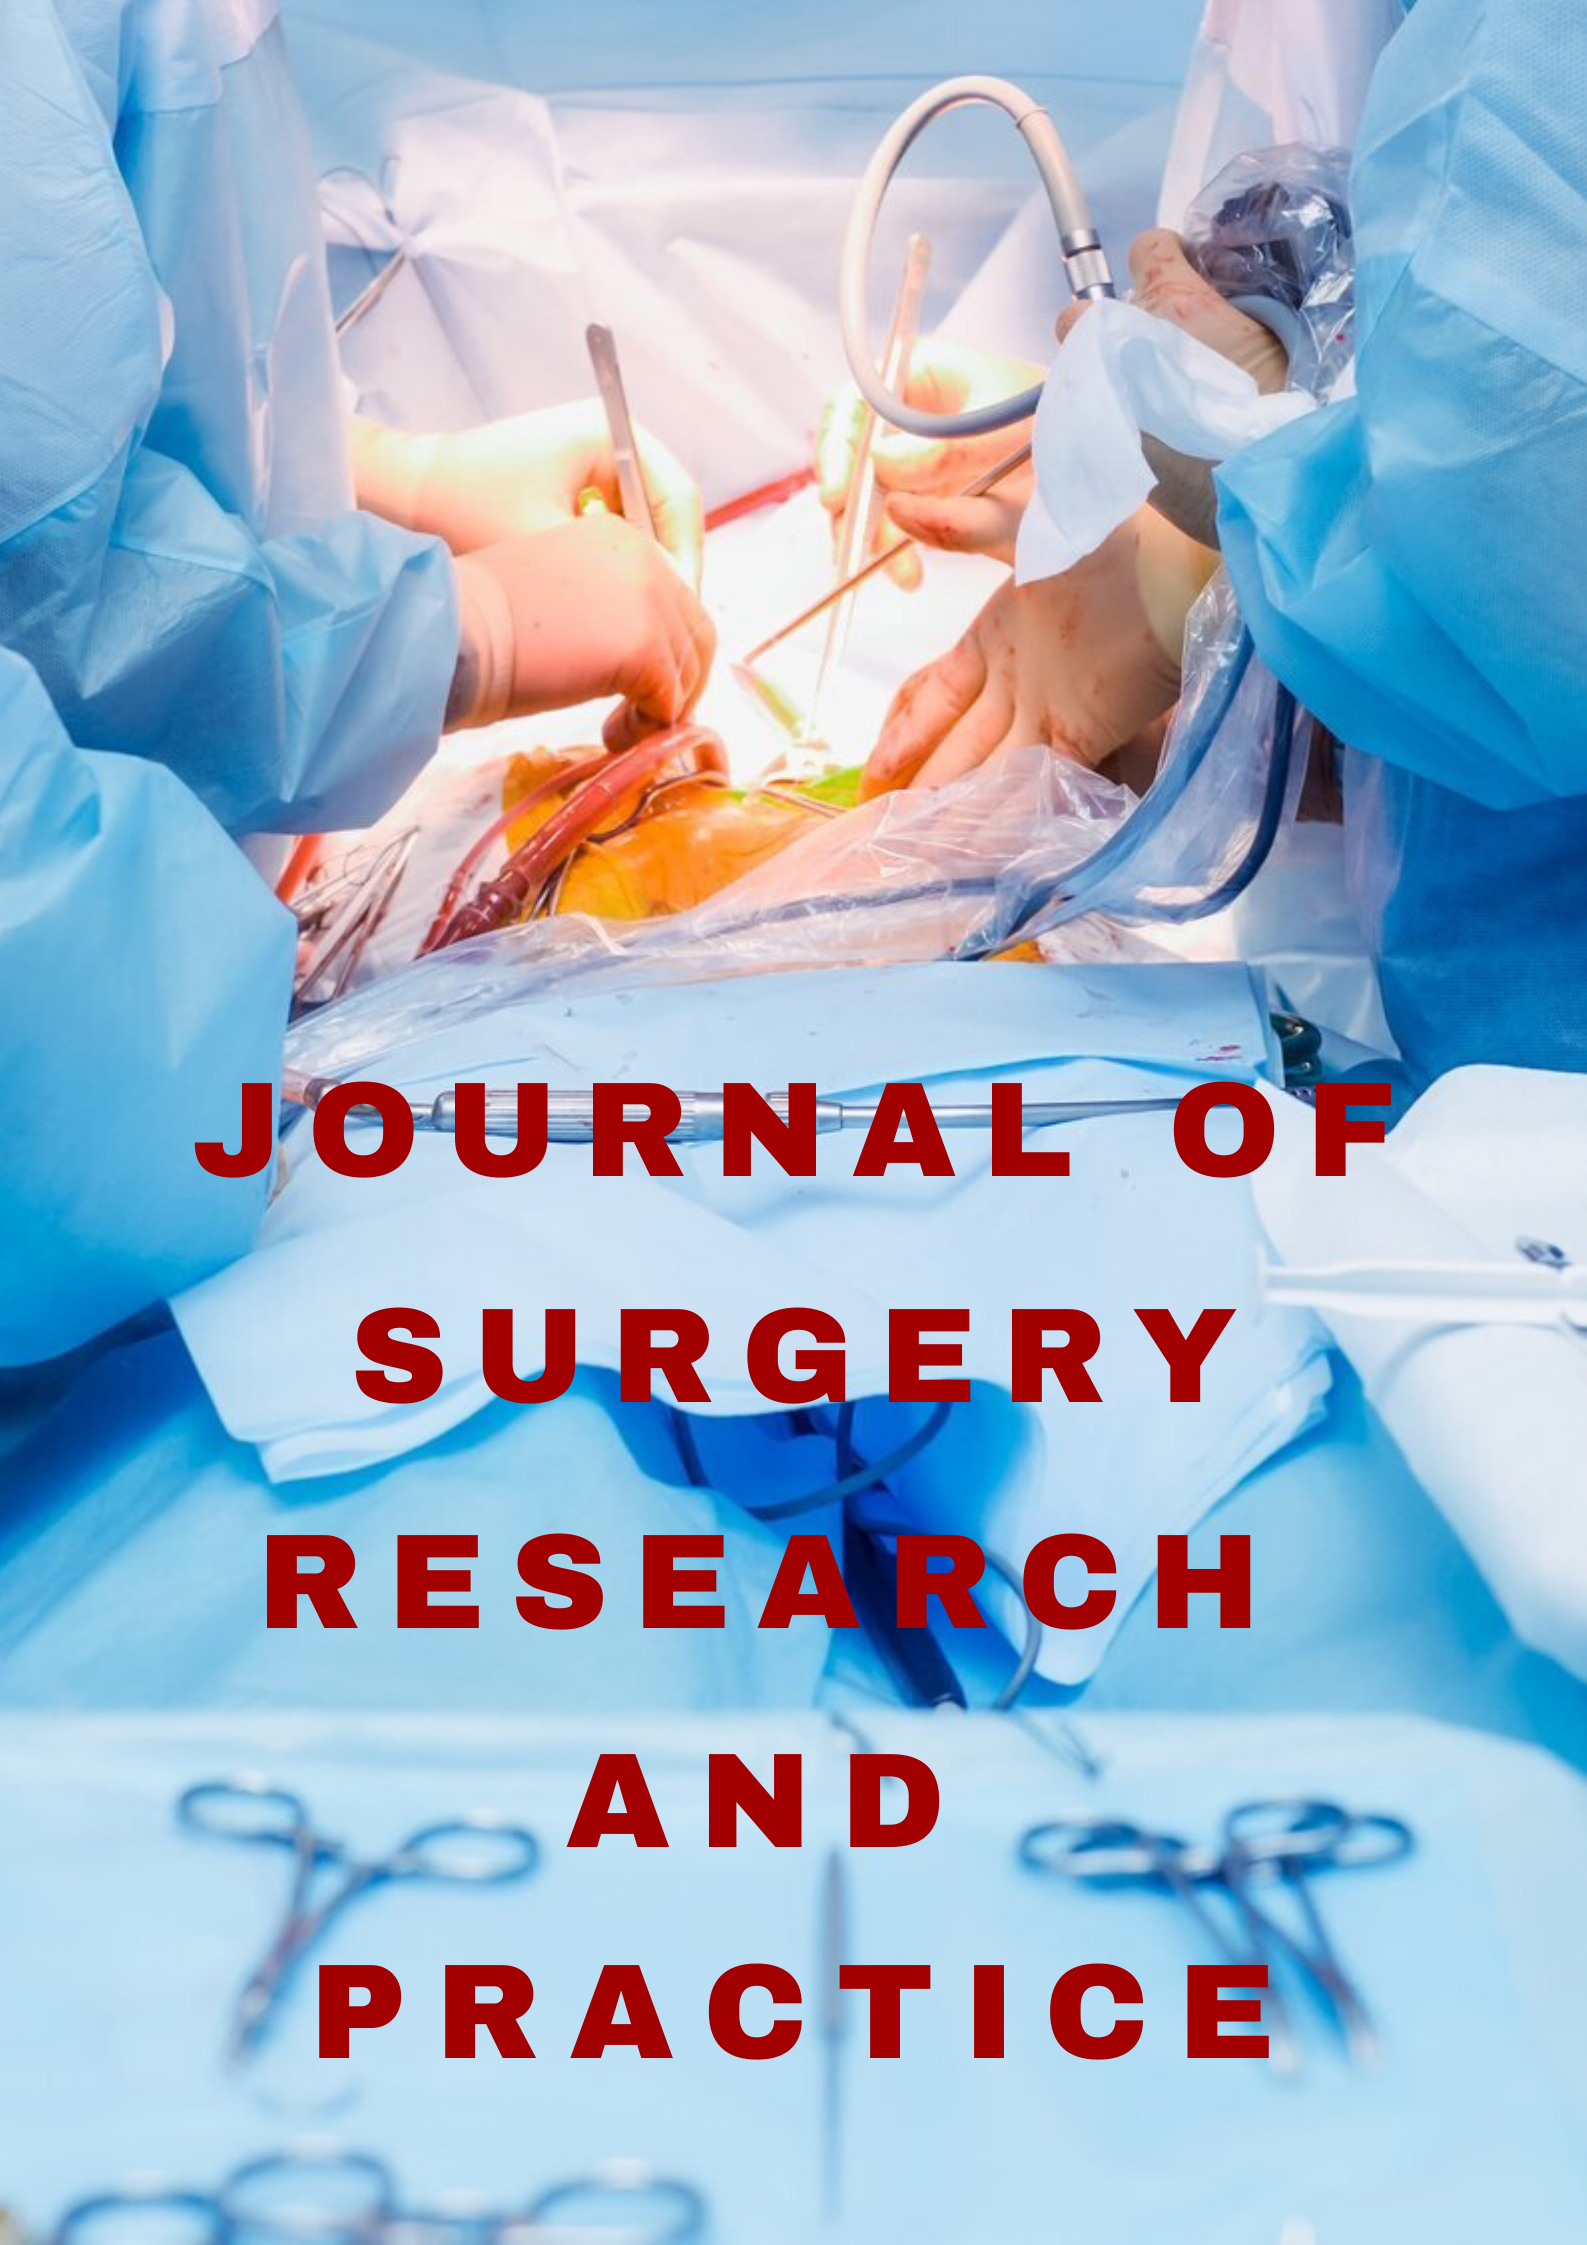 experimental research studies in medical surgical nursing